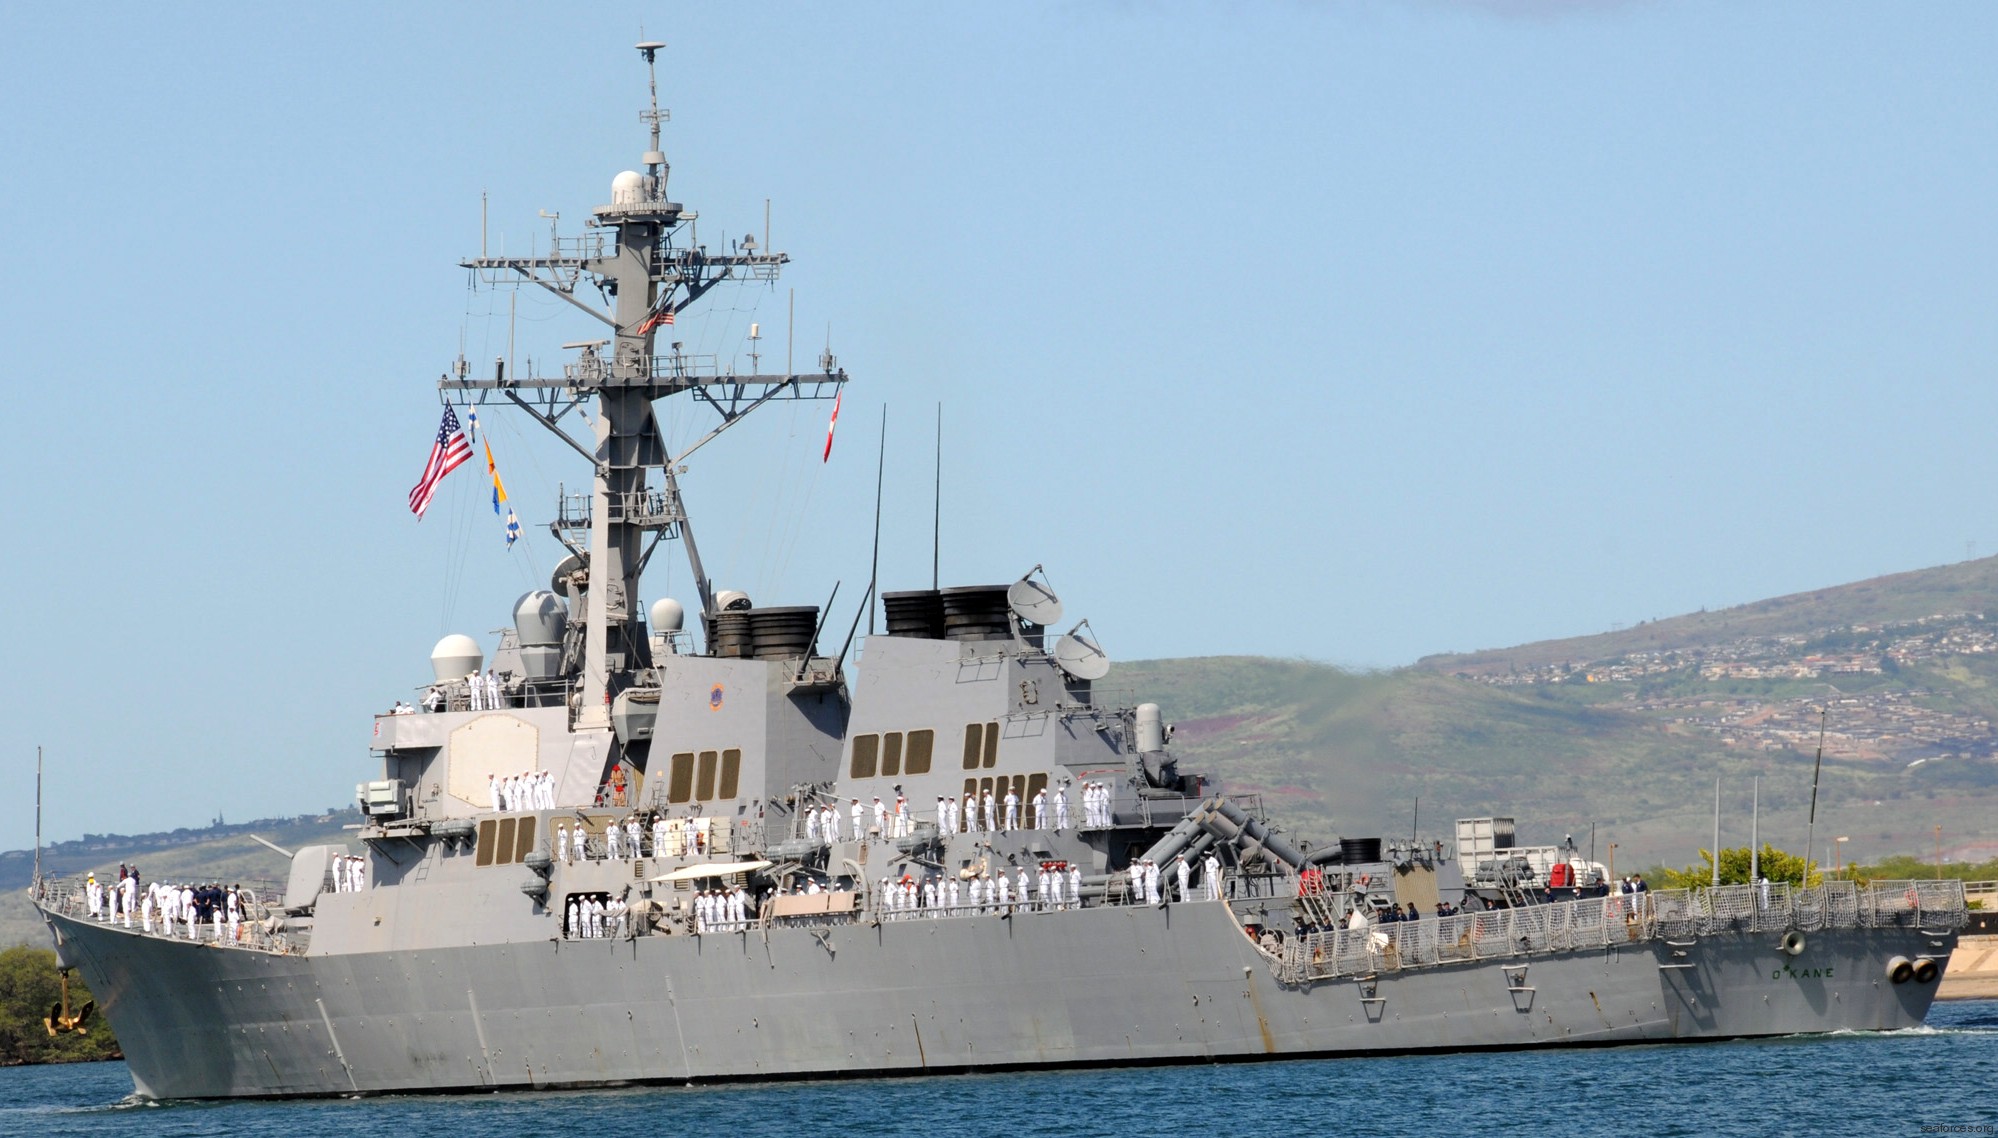 ddg-77 uss o'kane guided missile destroyer arleigh burke class navy aegis 39 naval station pearl harbor hawaii